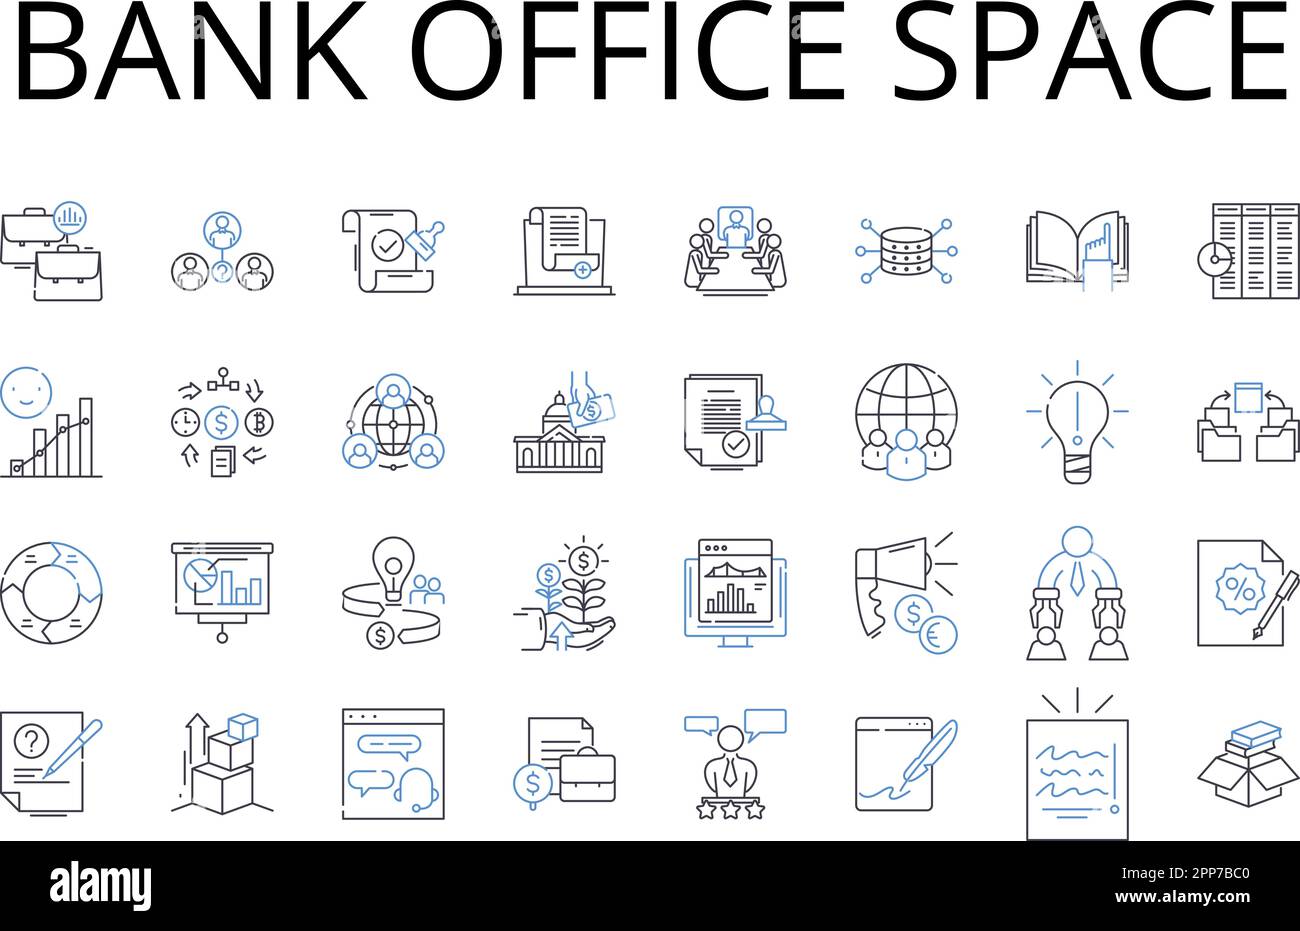 Bank office space line icons collection. Financial institution premises, Banking establishment area, Cash handling office, My management space Stock Vector